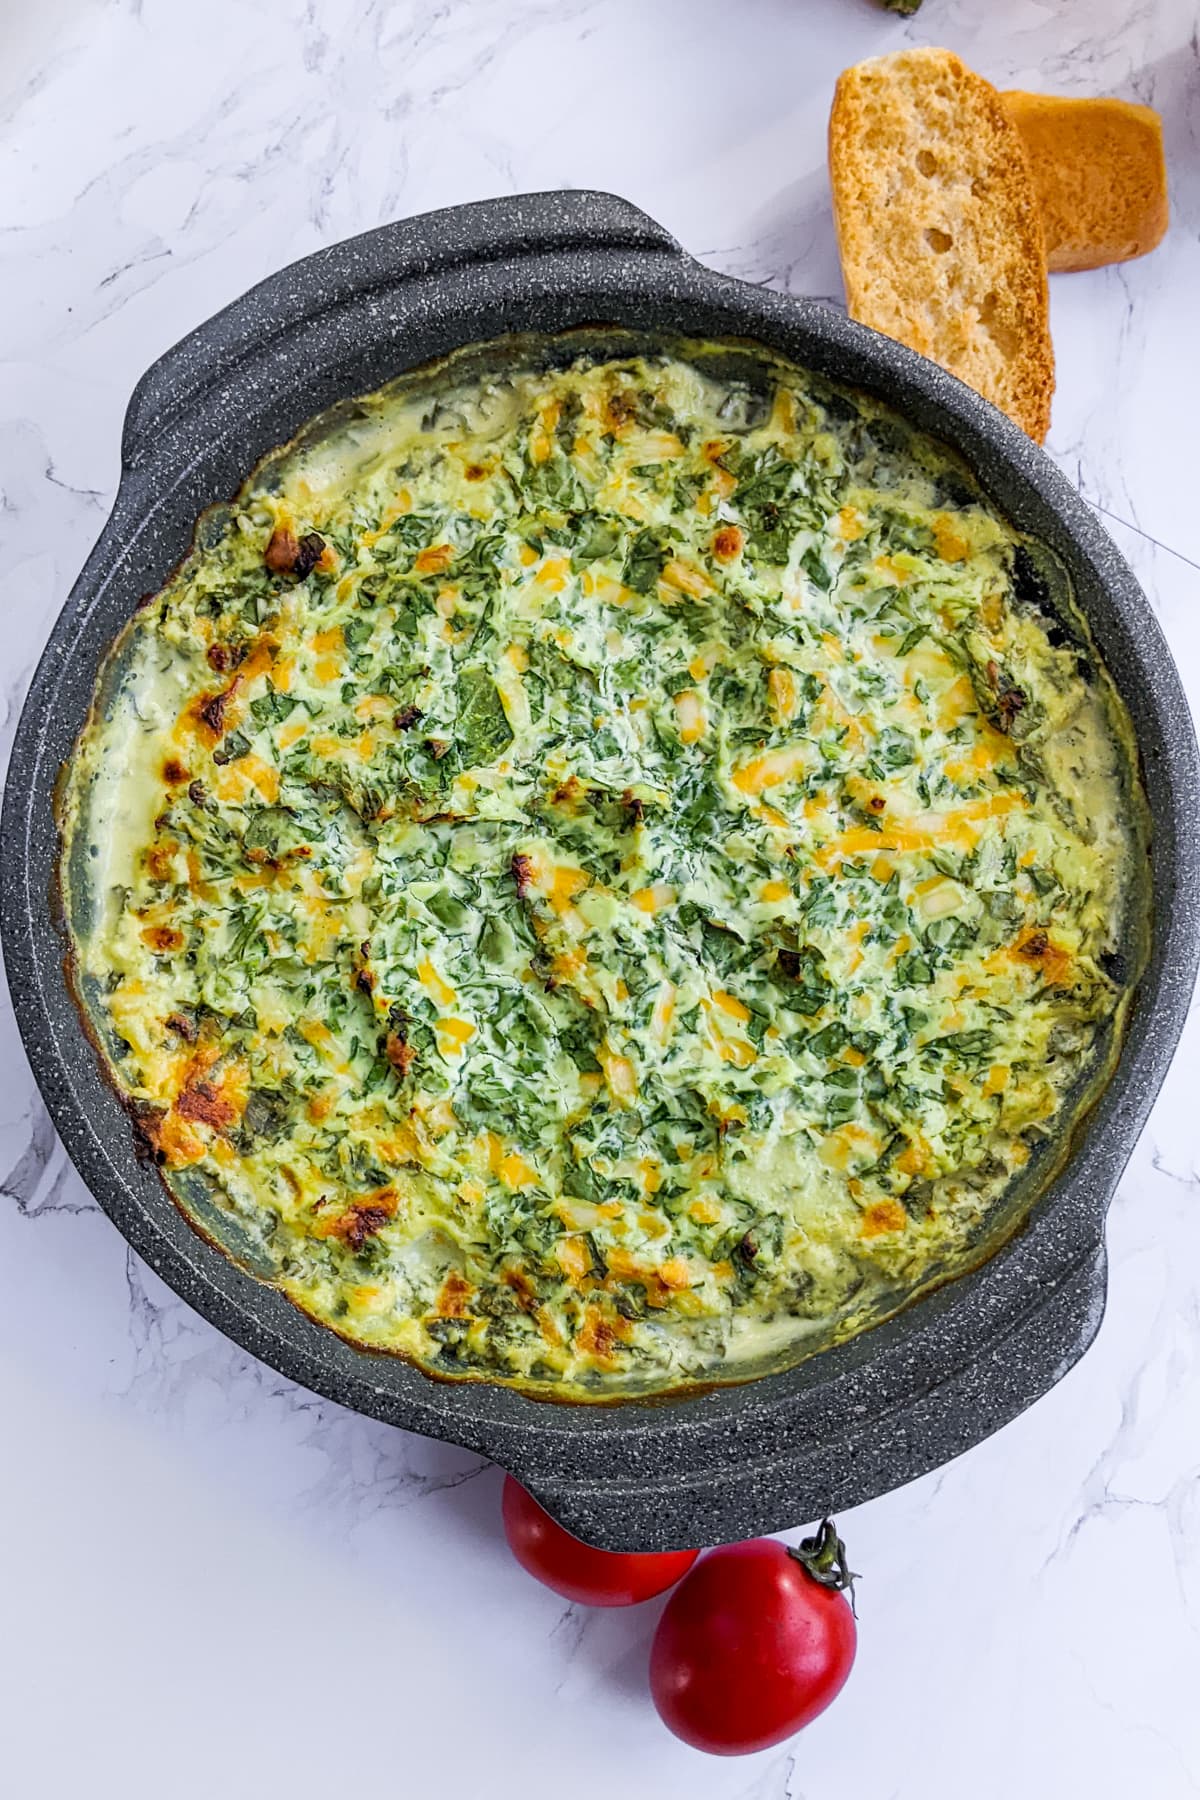 Top view of spinach dip on a white background.